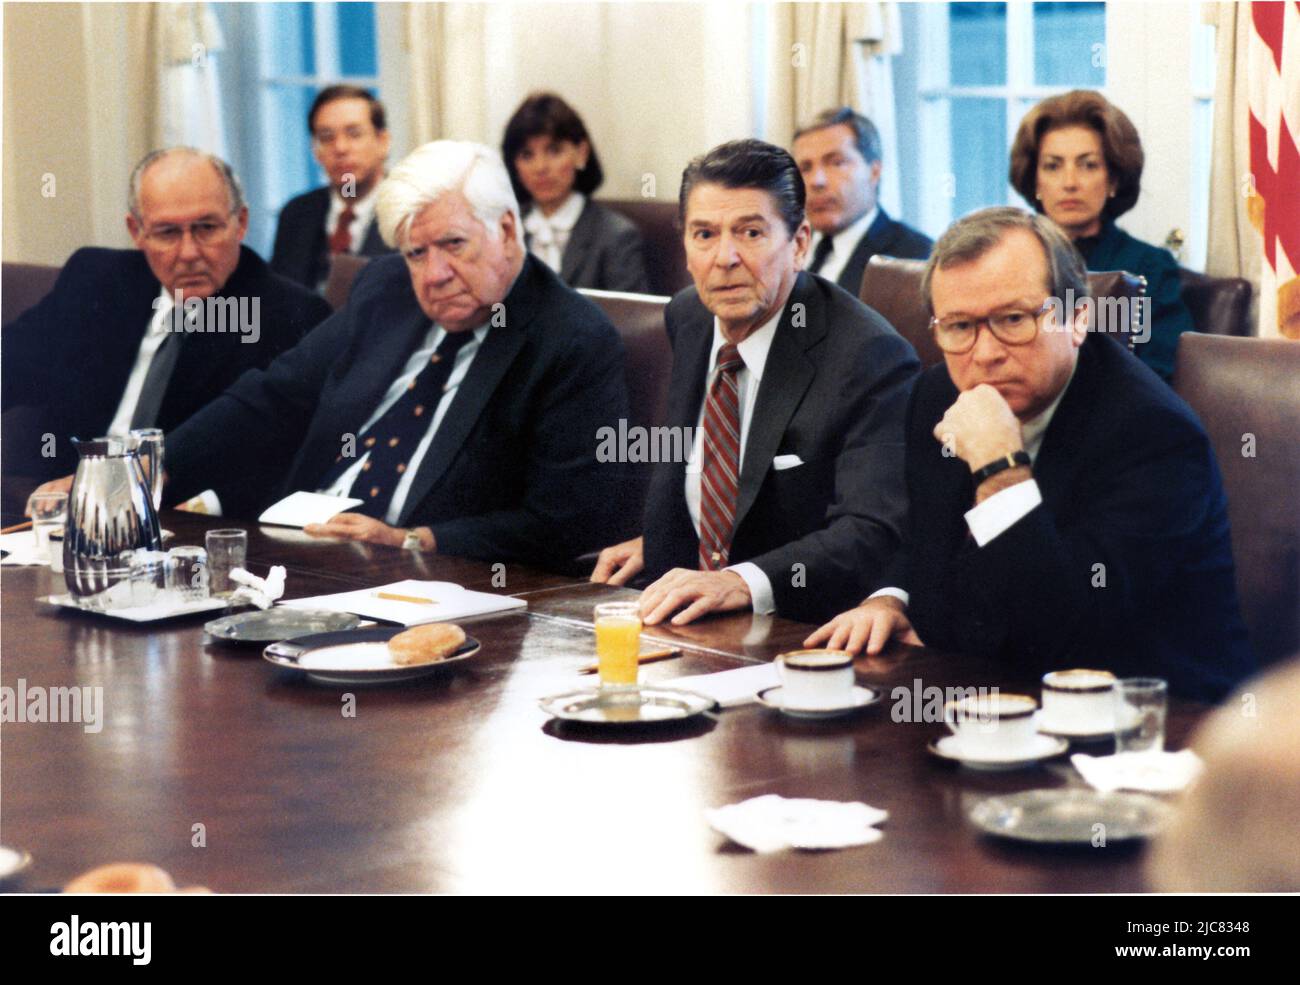 Jan. 11, 2010 - Washington, District of Columbia, United States of America - United States President Ronald Reagan meets with Congressional Leadership in the Cabinet Room of the White House in Washington, DC on Tuesday, October 25, 1983 to discuss the invasion of Grenada. From left to right: U.S. House Minority Leader Robert Michel (Republican of Illinois); Speaker of the U.S. House Thomas P. ''Tip'' O'Neill (Democrat of Massachusetts); President Reagan; and U.S. Senate Majority Leader Howard Baker (Republican of Tennessee).Mandatory Credit: Michael Evans - White House via CNP (Credit Imag Stock Photo